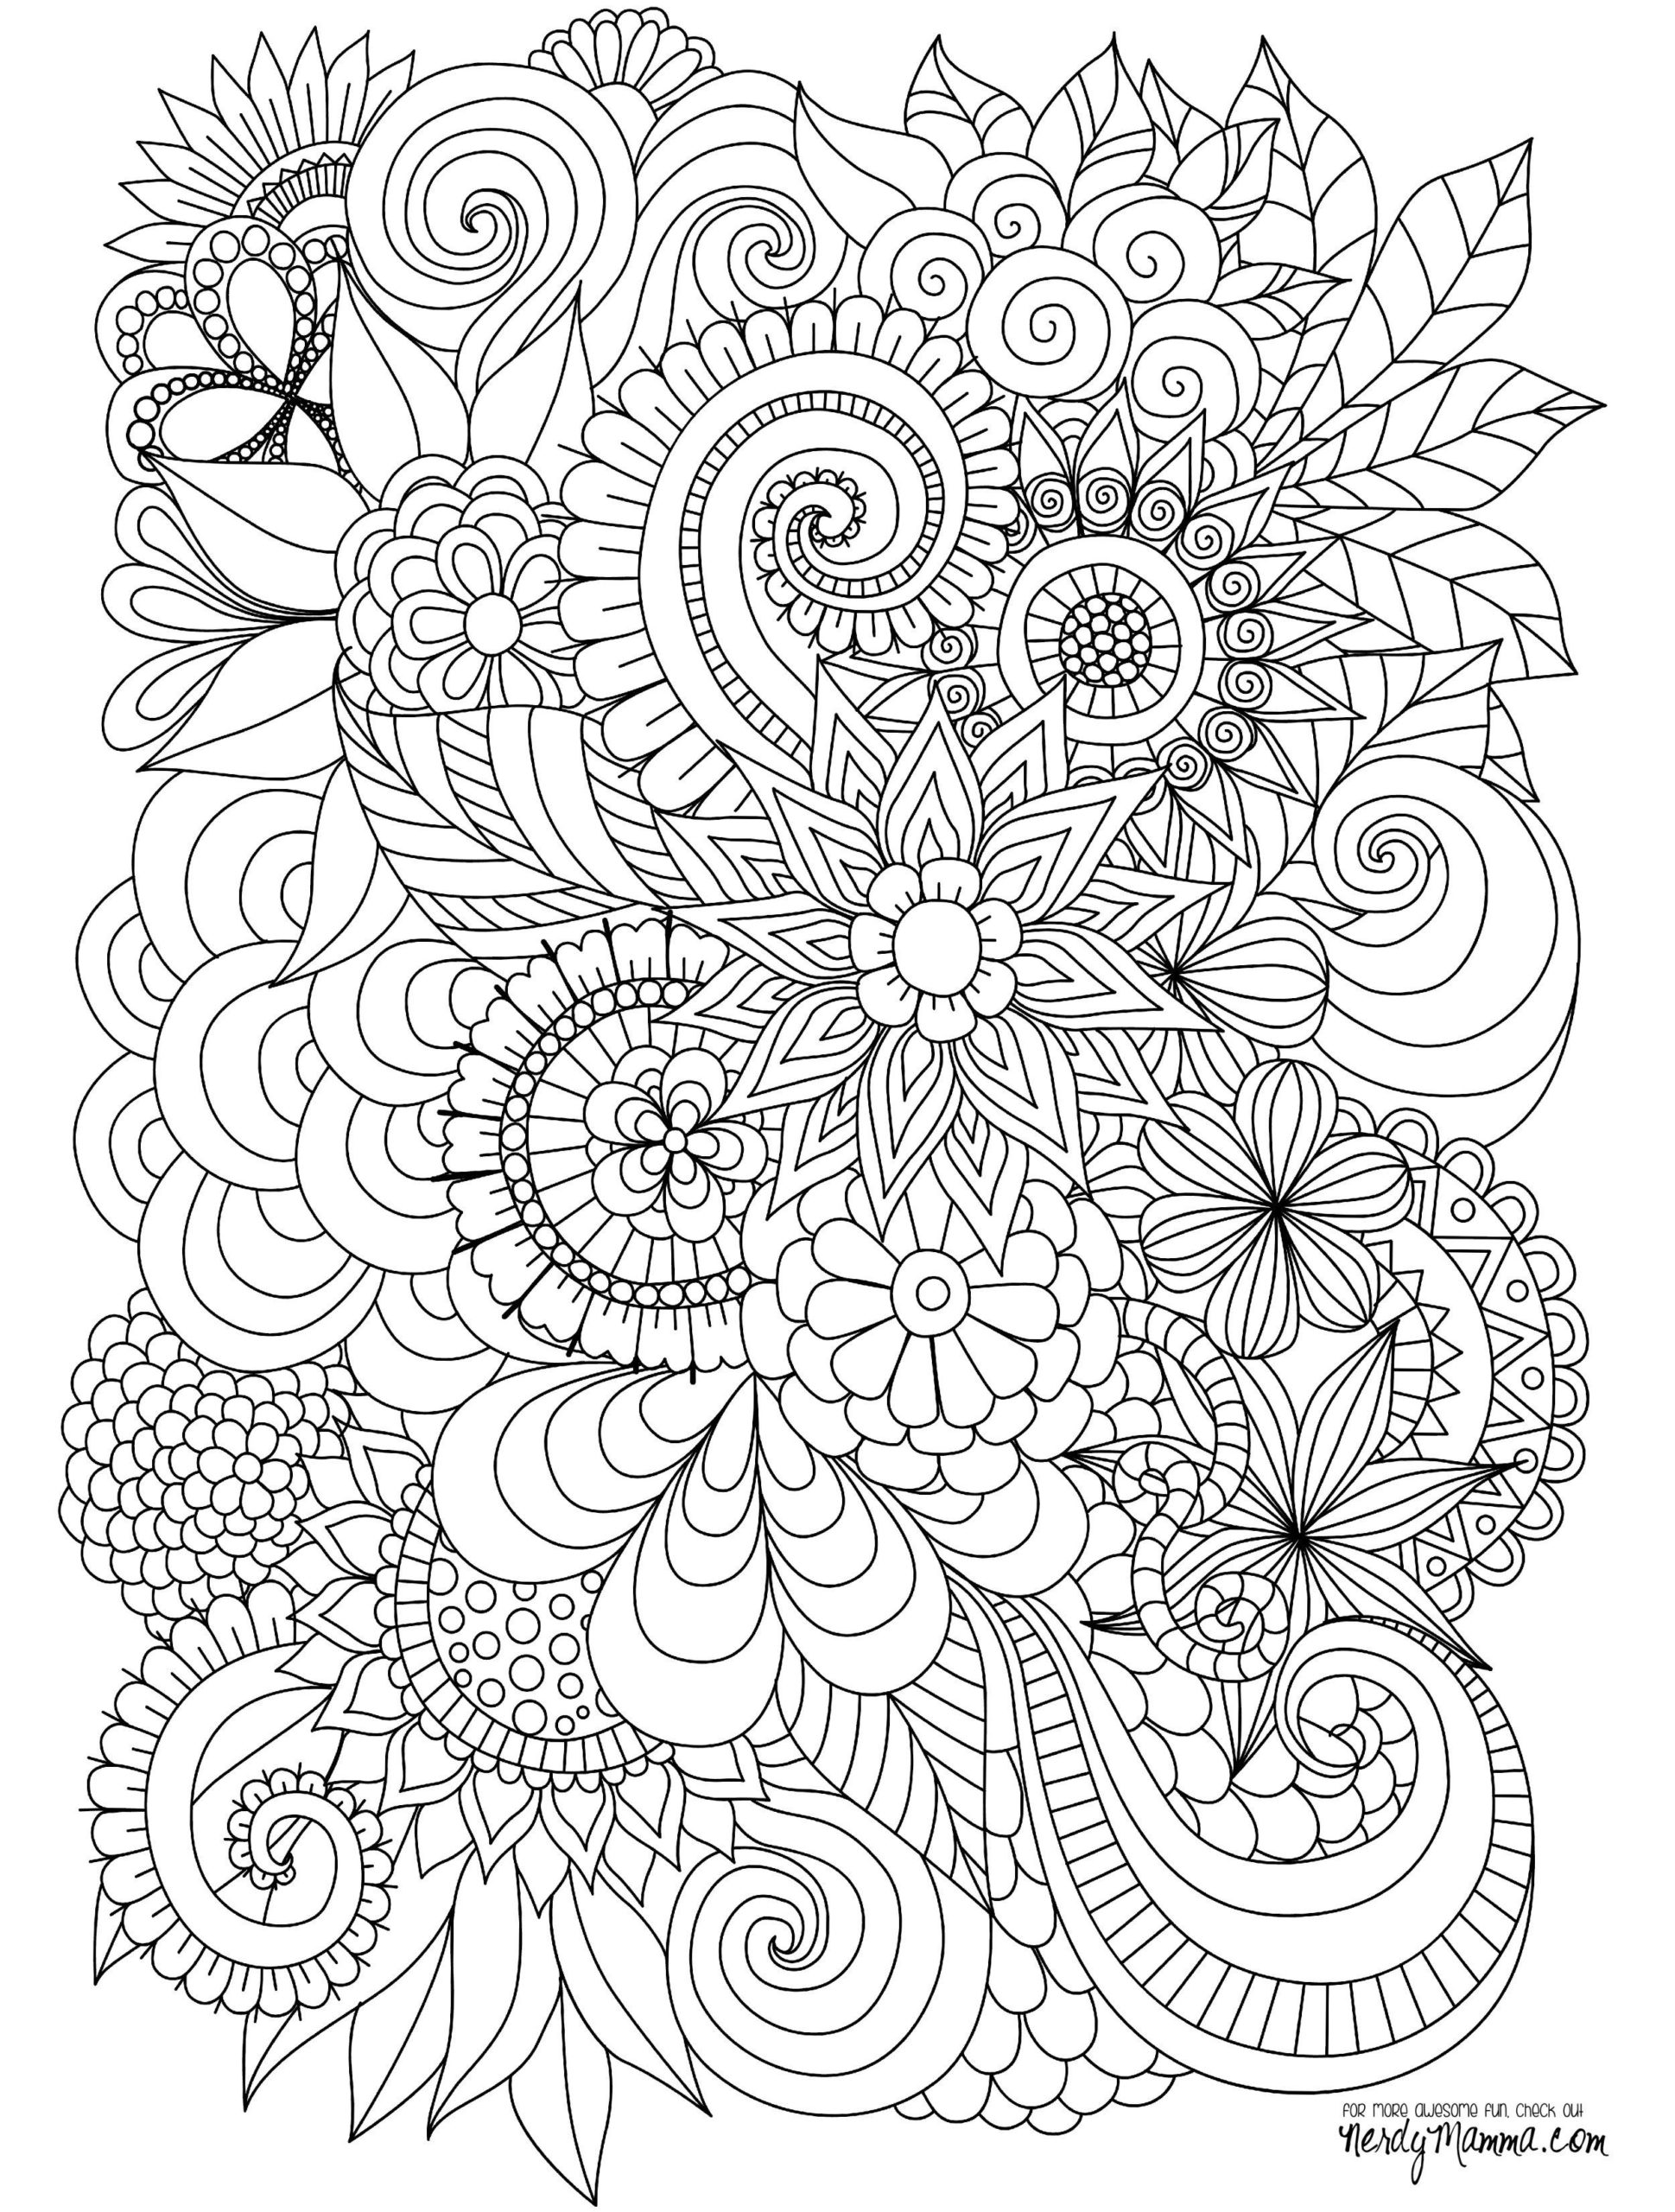 Coloring Book : Zentangle Coloring Pages Fun Time Free ...